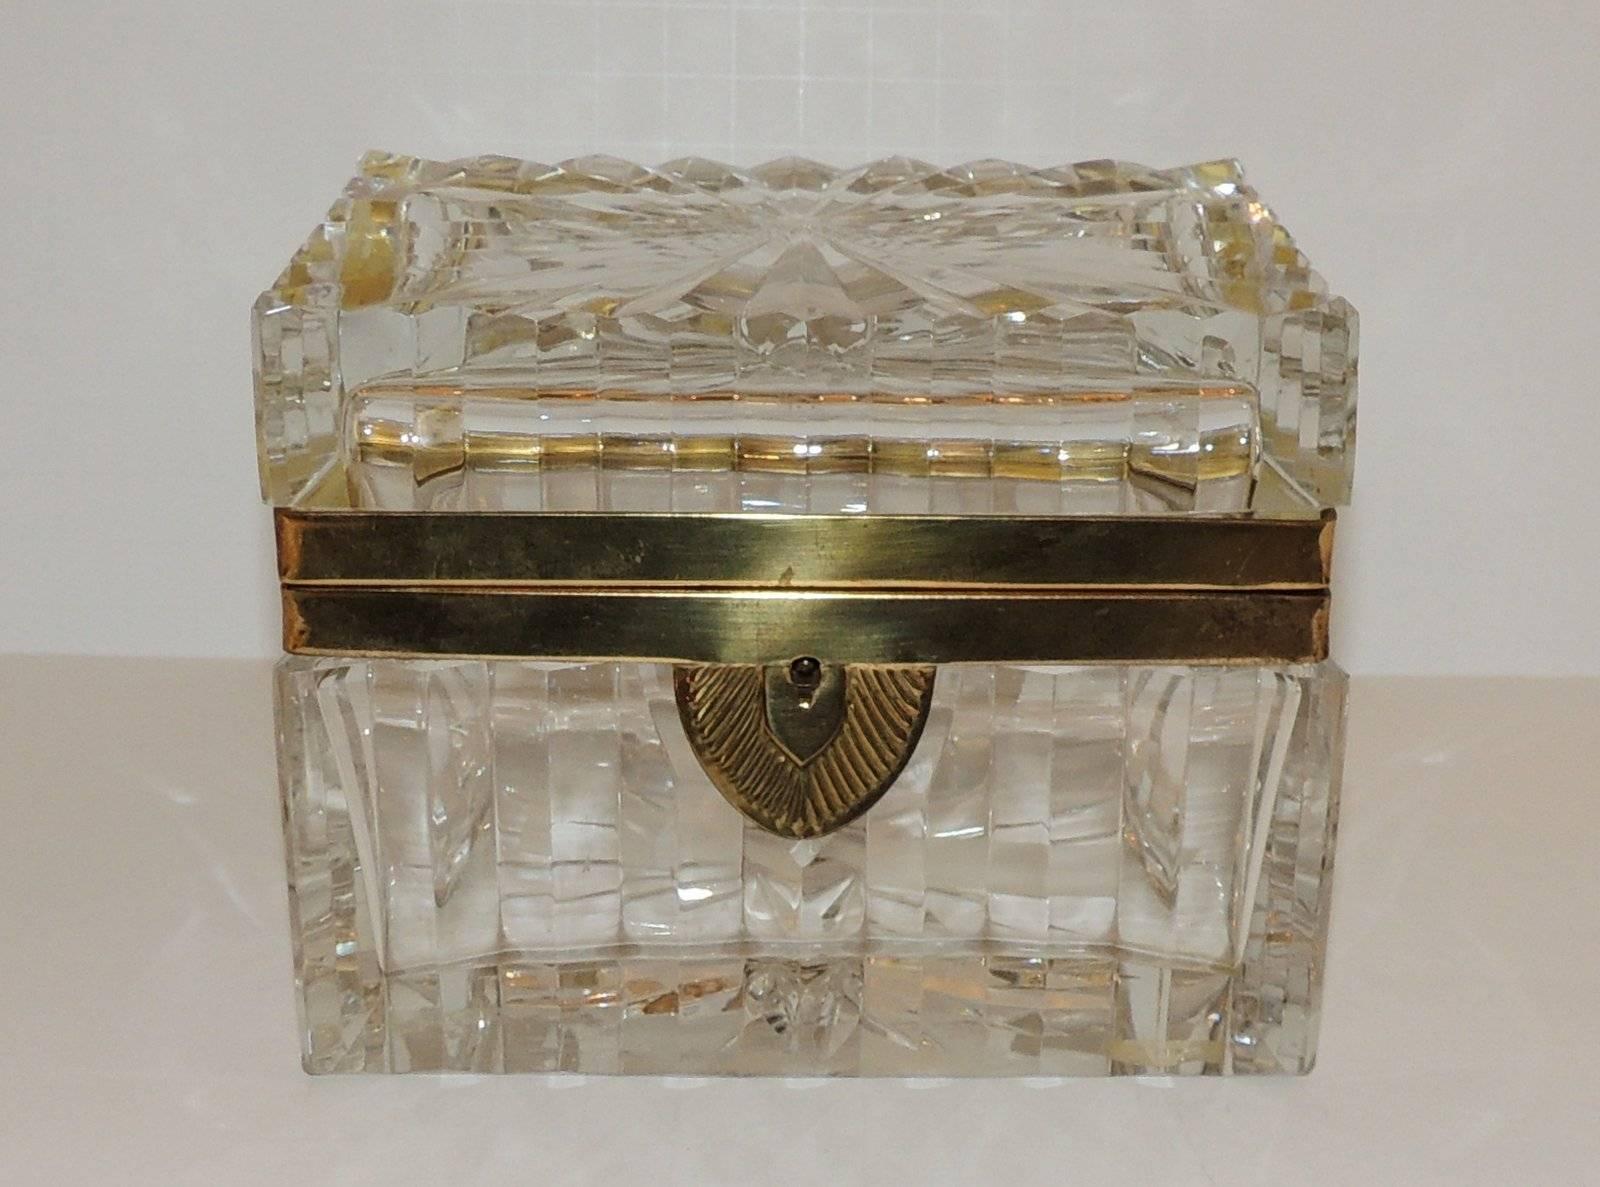 Faceted Stunning Pair French Etched Cut Crystal Ormolu-Mounted Deco Casket Jewelry Box